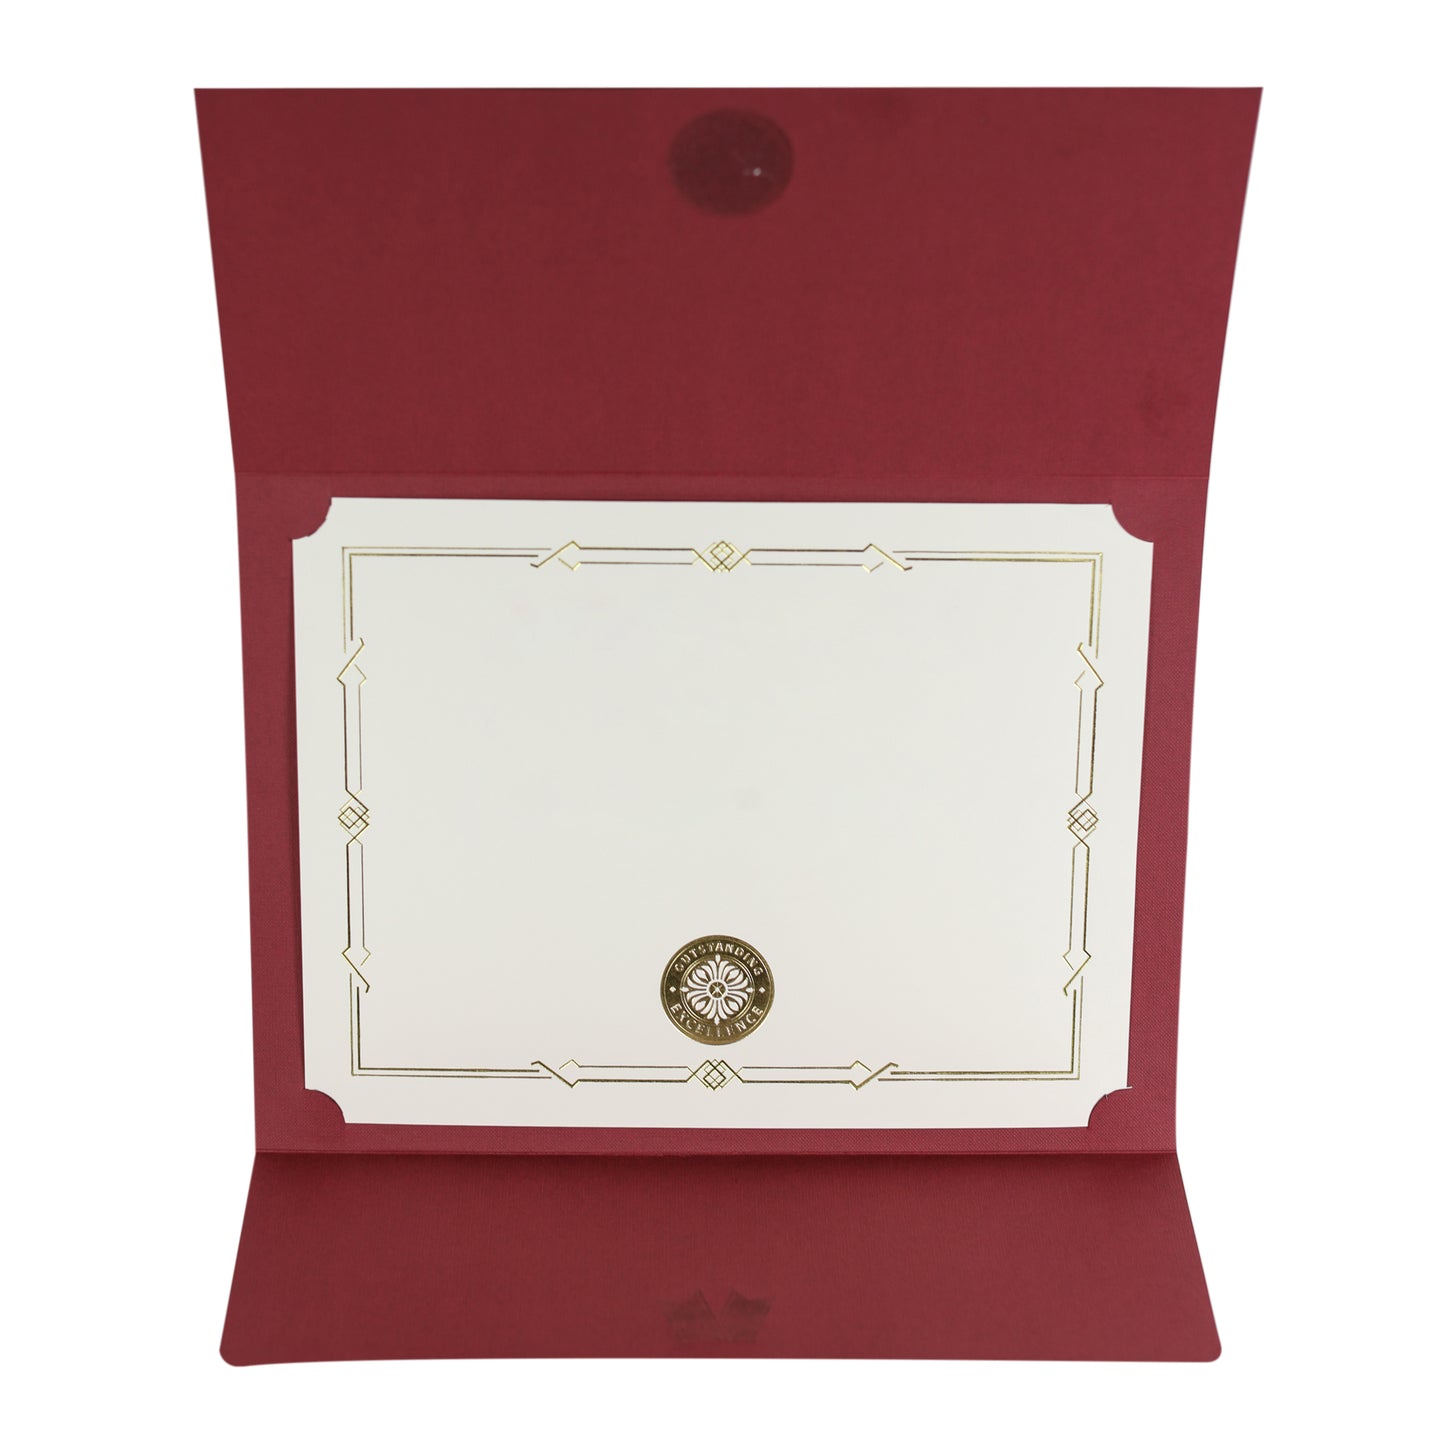 St. James® Certificate Holders/Document Covers/Diploma Holders, Burgundy, Gold Award Seal with Red Ribbon, Pack of 5, 83818